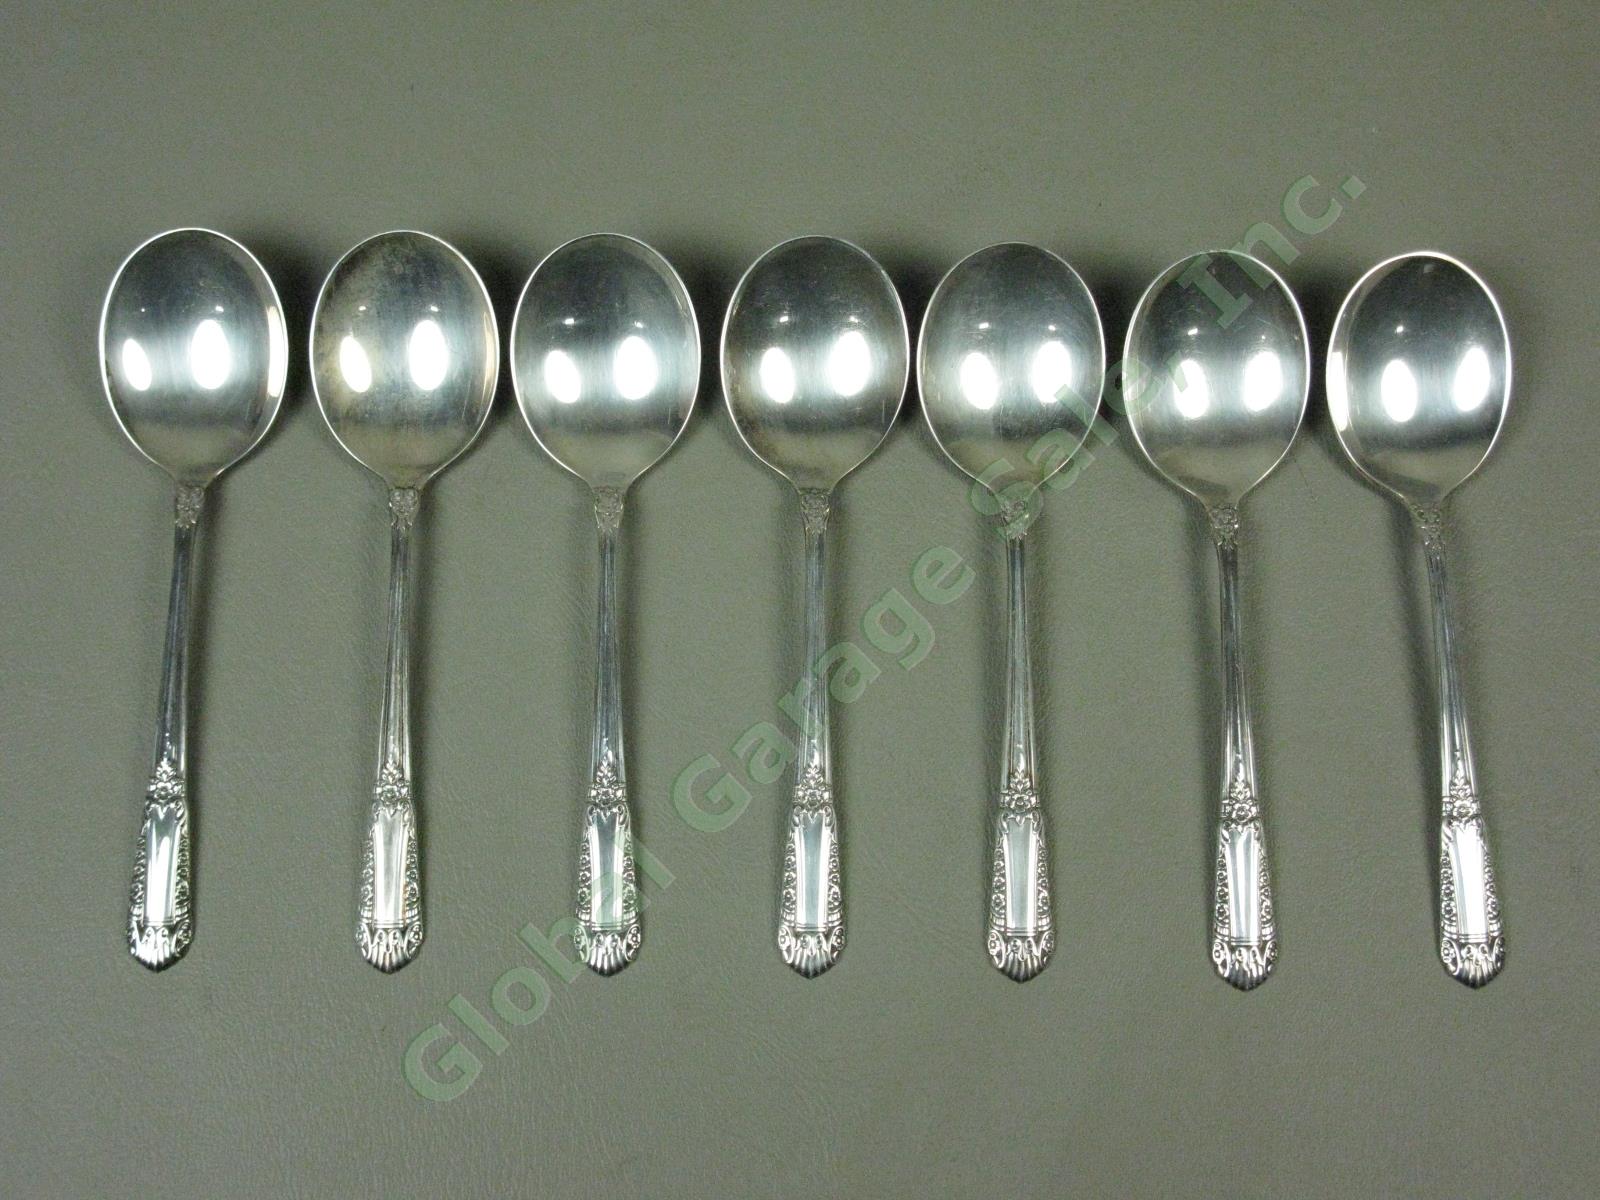 7 State House Inaugural Sterling Silver Soup Spoons Silverware Flatware Set NR!